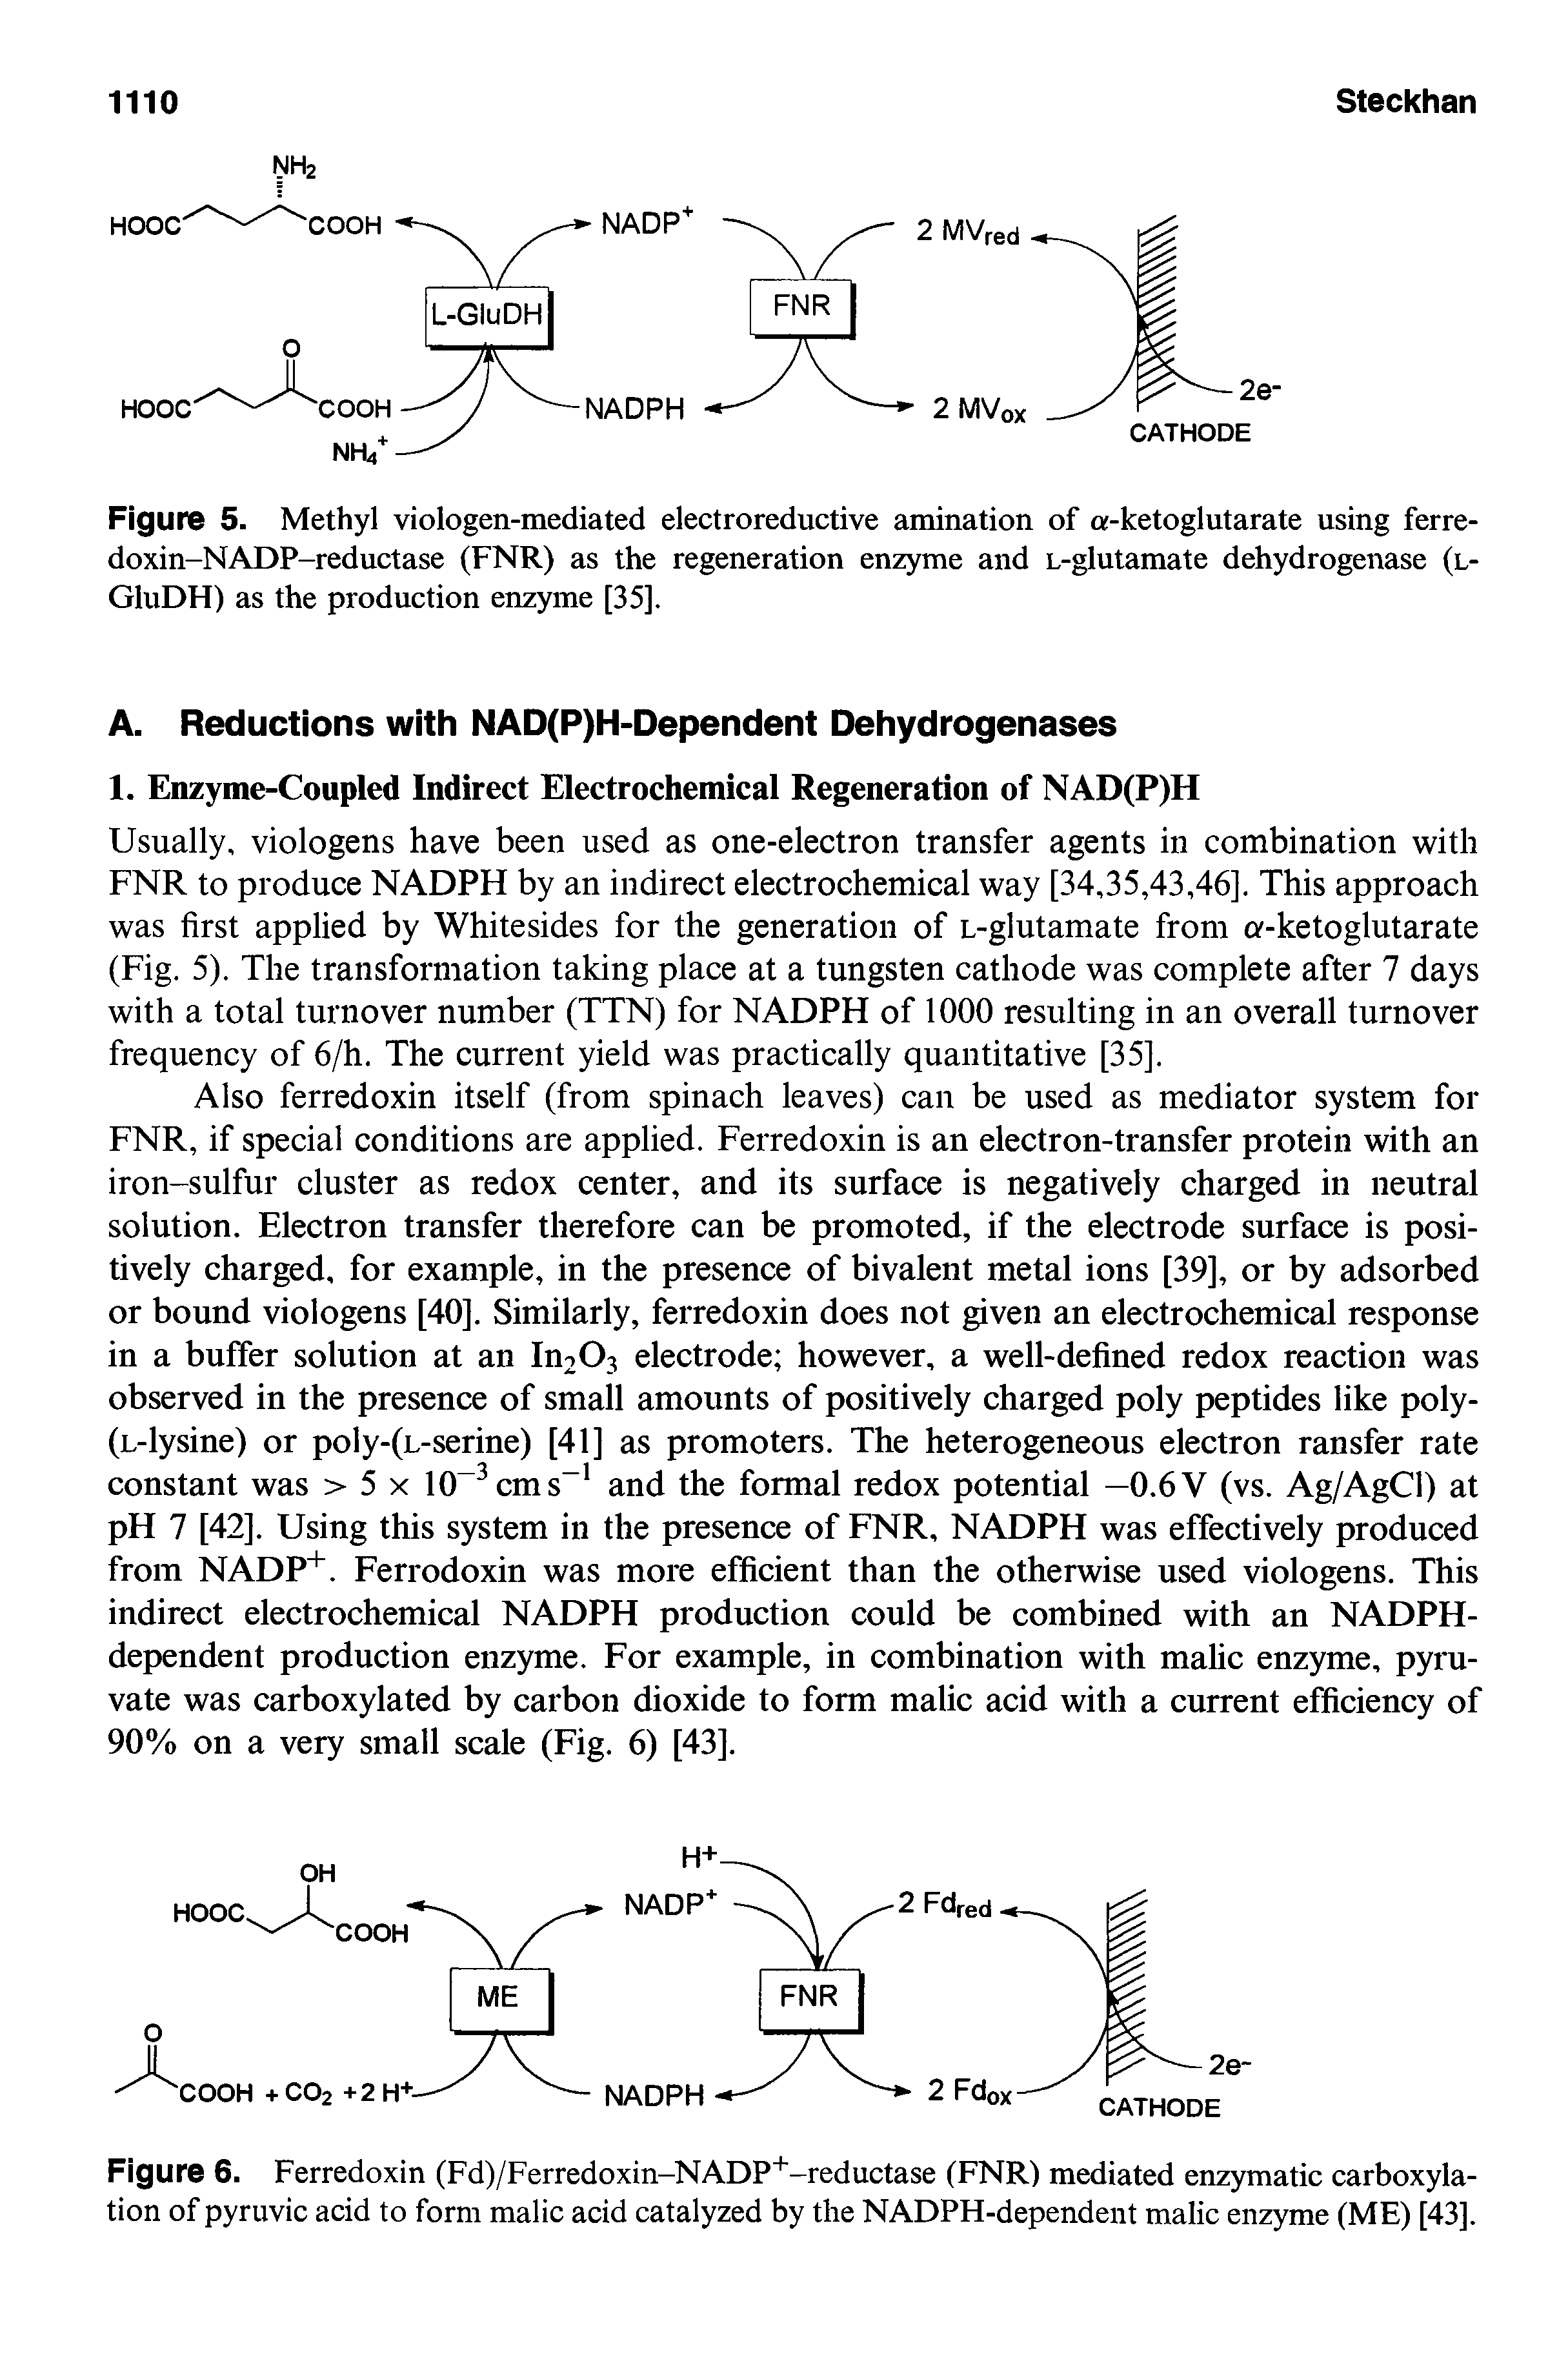 Figure 5. Methyl viologen-mediated electroreductive amination of a-ketoglutarate using ferre-doxin-NADP-reductase (FNR) as the regeneration enzyme and L-glutamate dehydrogenase (l-GluDH) as the production enzyme [35].